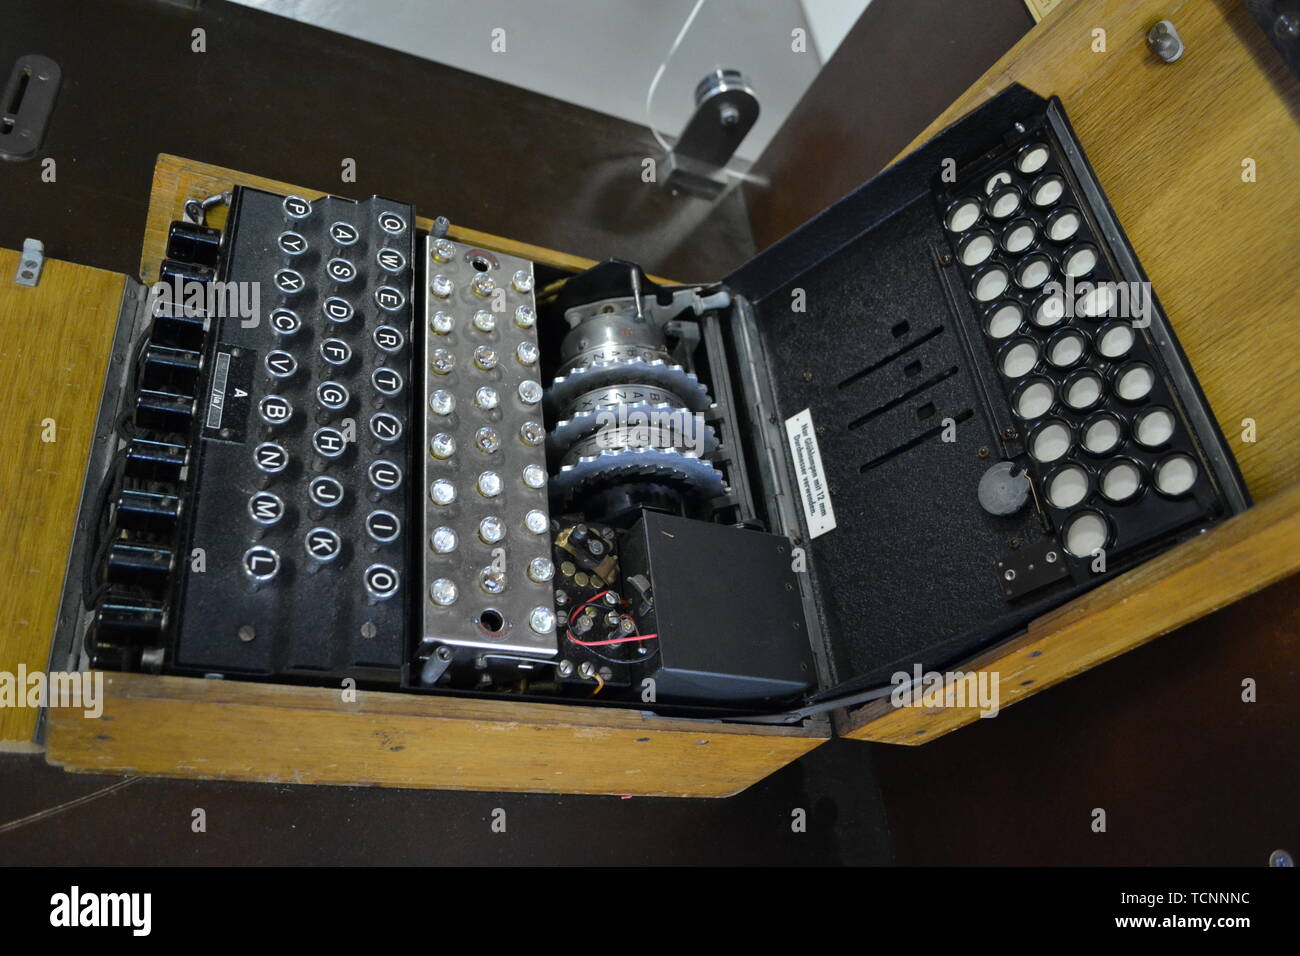 A Mark 22 Typex Machine on display in the Decoding Room in Hut 6, Bletchley  Park, Bletchley, Buckinghamshire, UK Stock Photo - Alamy